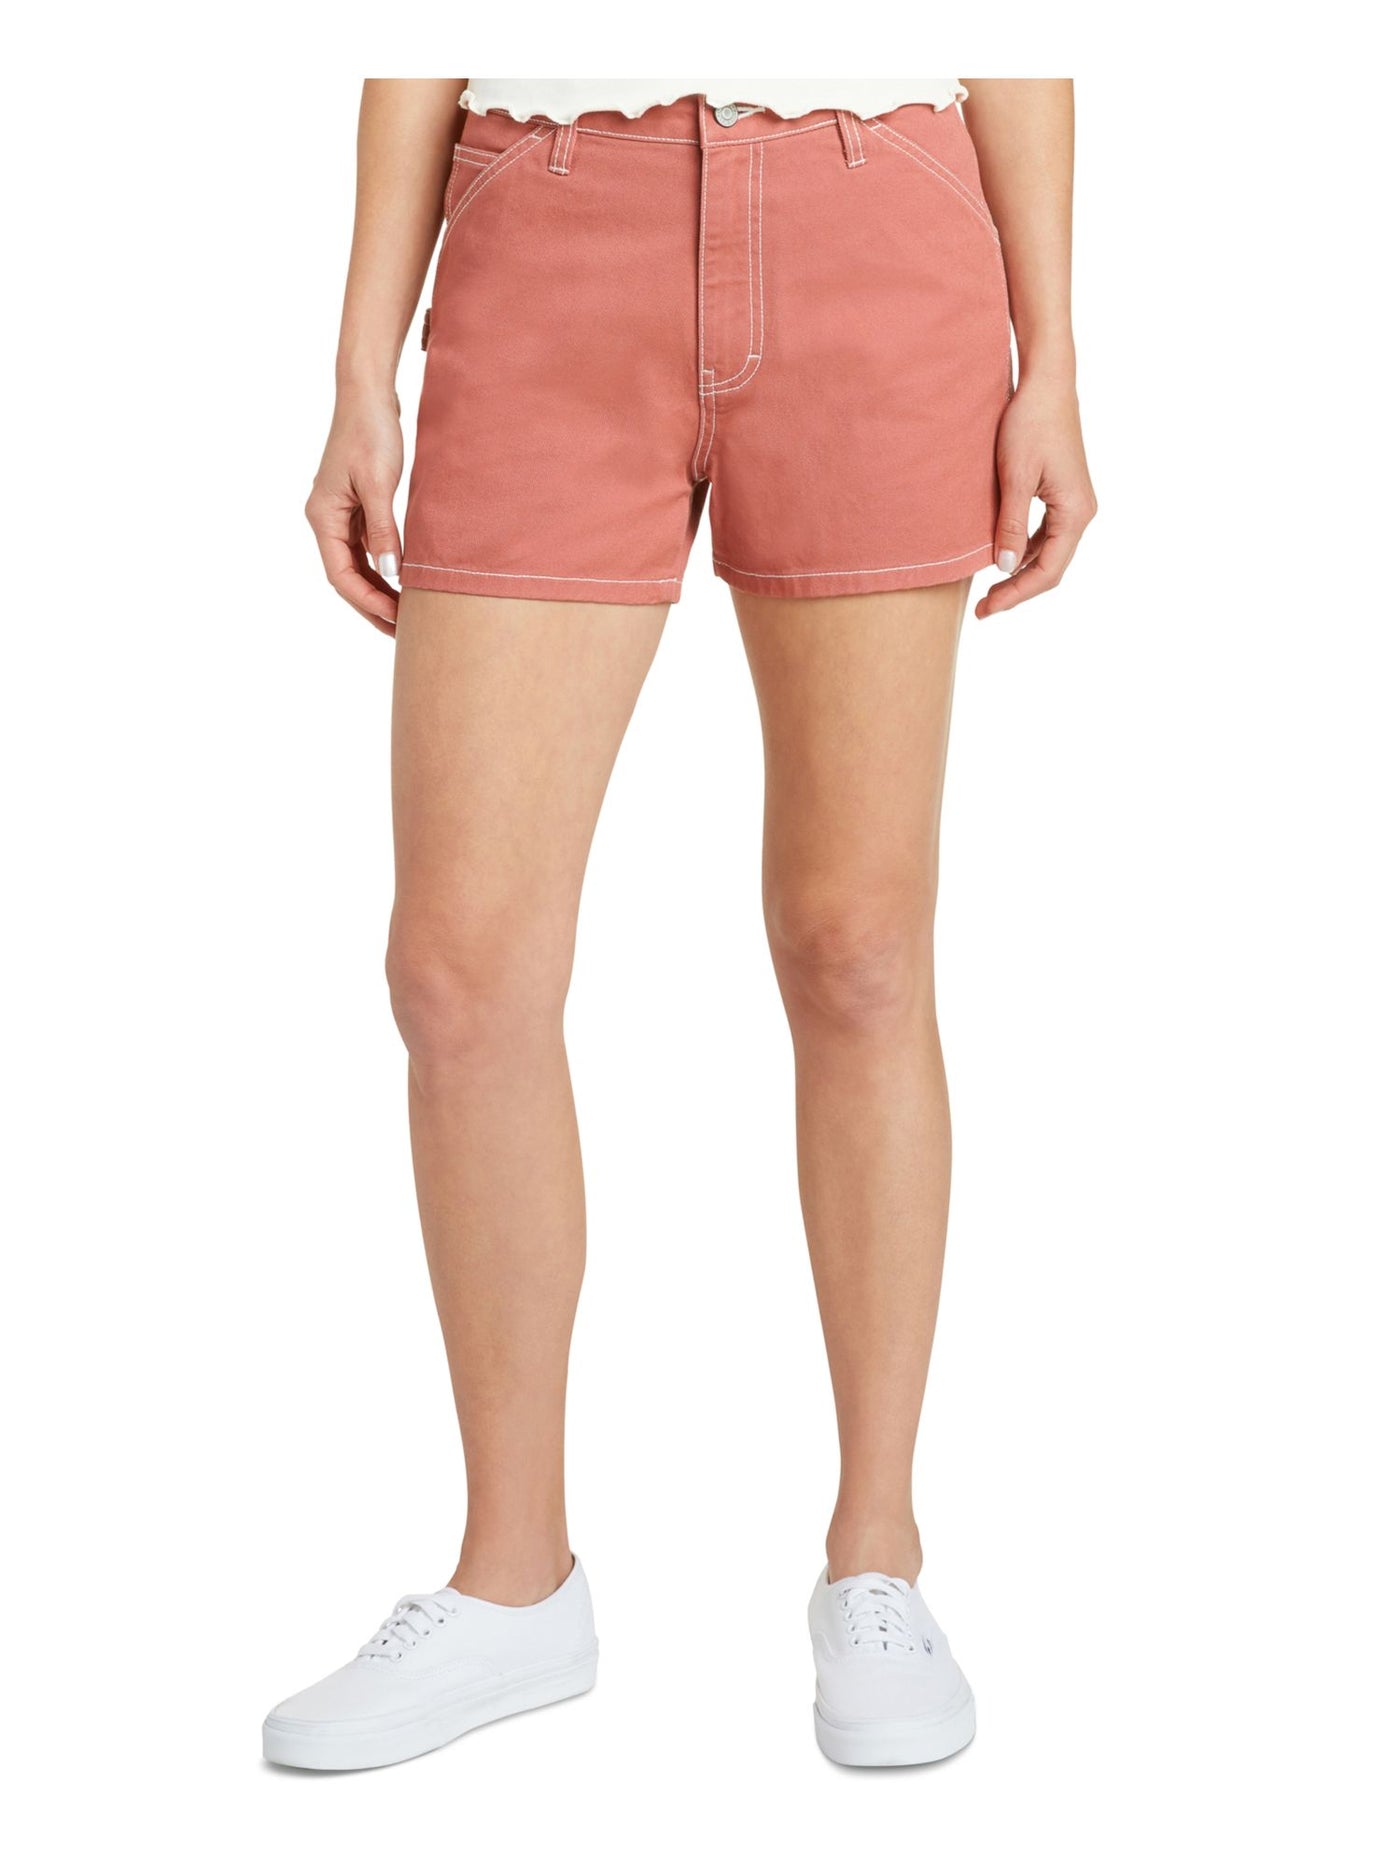 DICKIES Womens Coral Cotton Zippered Pocketed Bold Stitching Carpenter High Waist Shorts Juniors 7\28